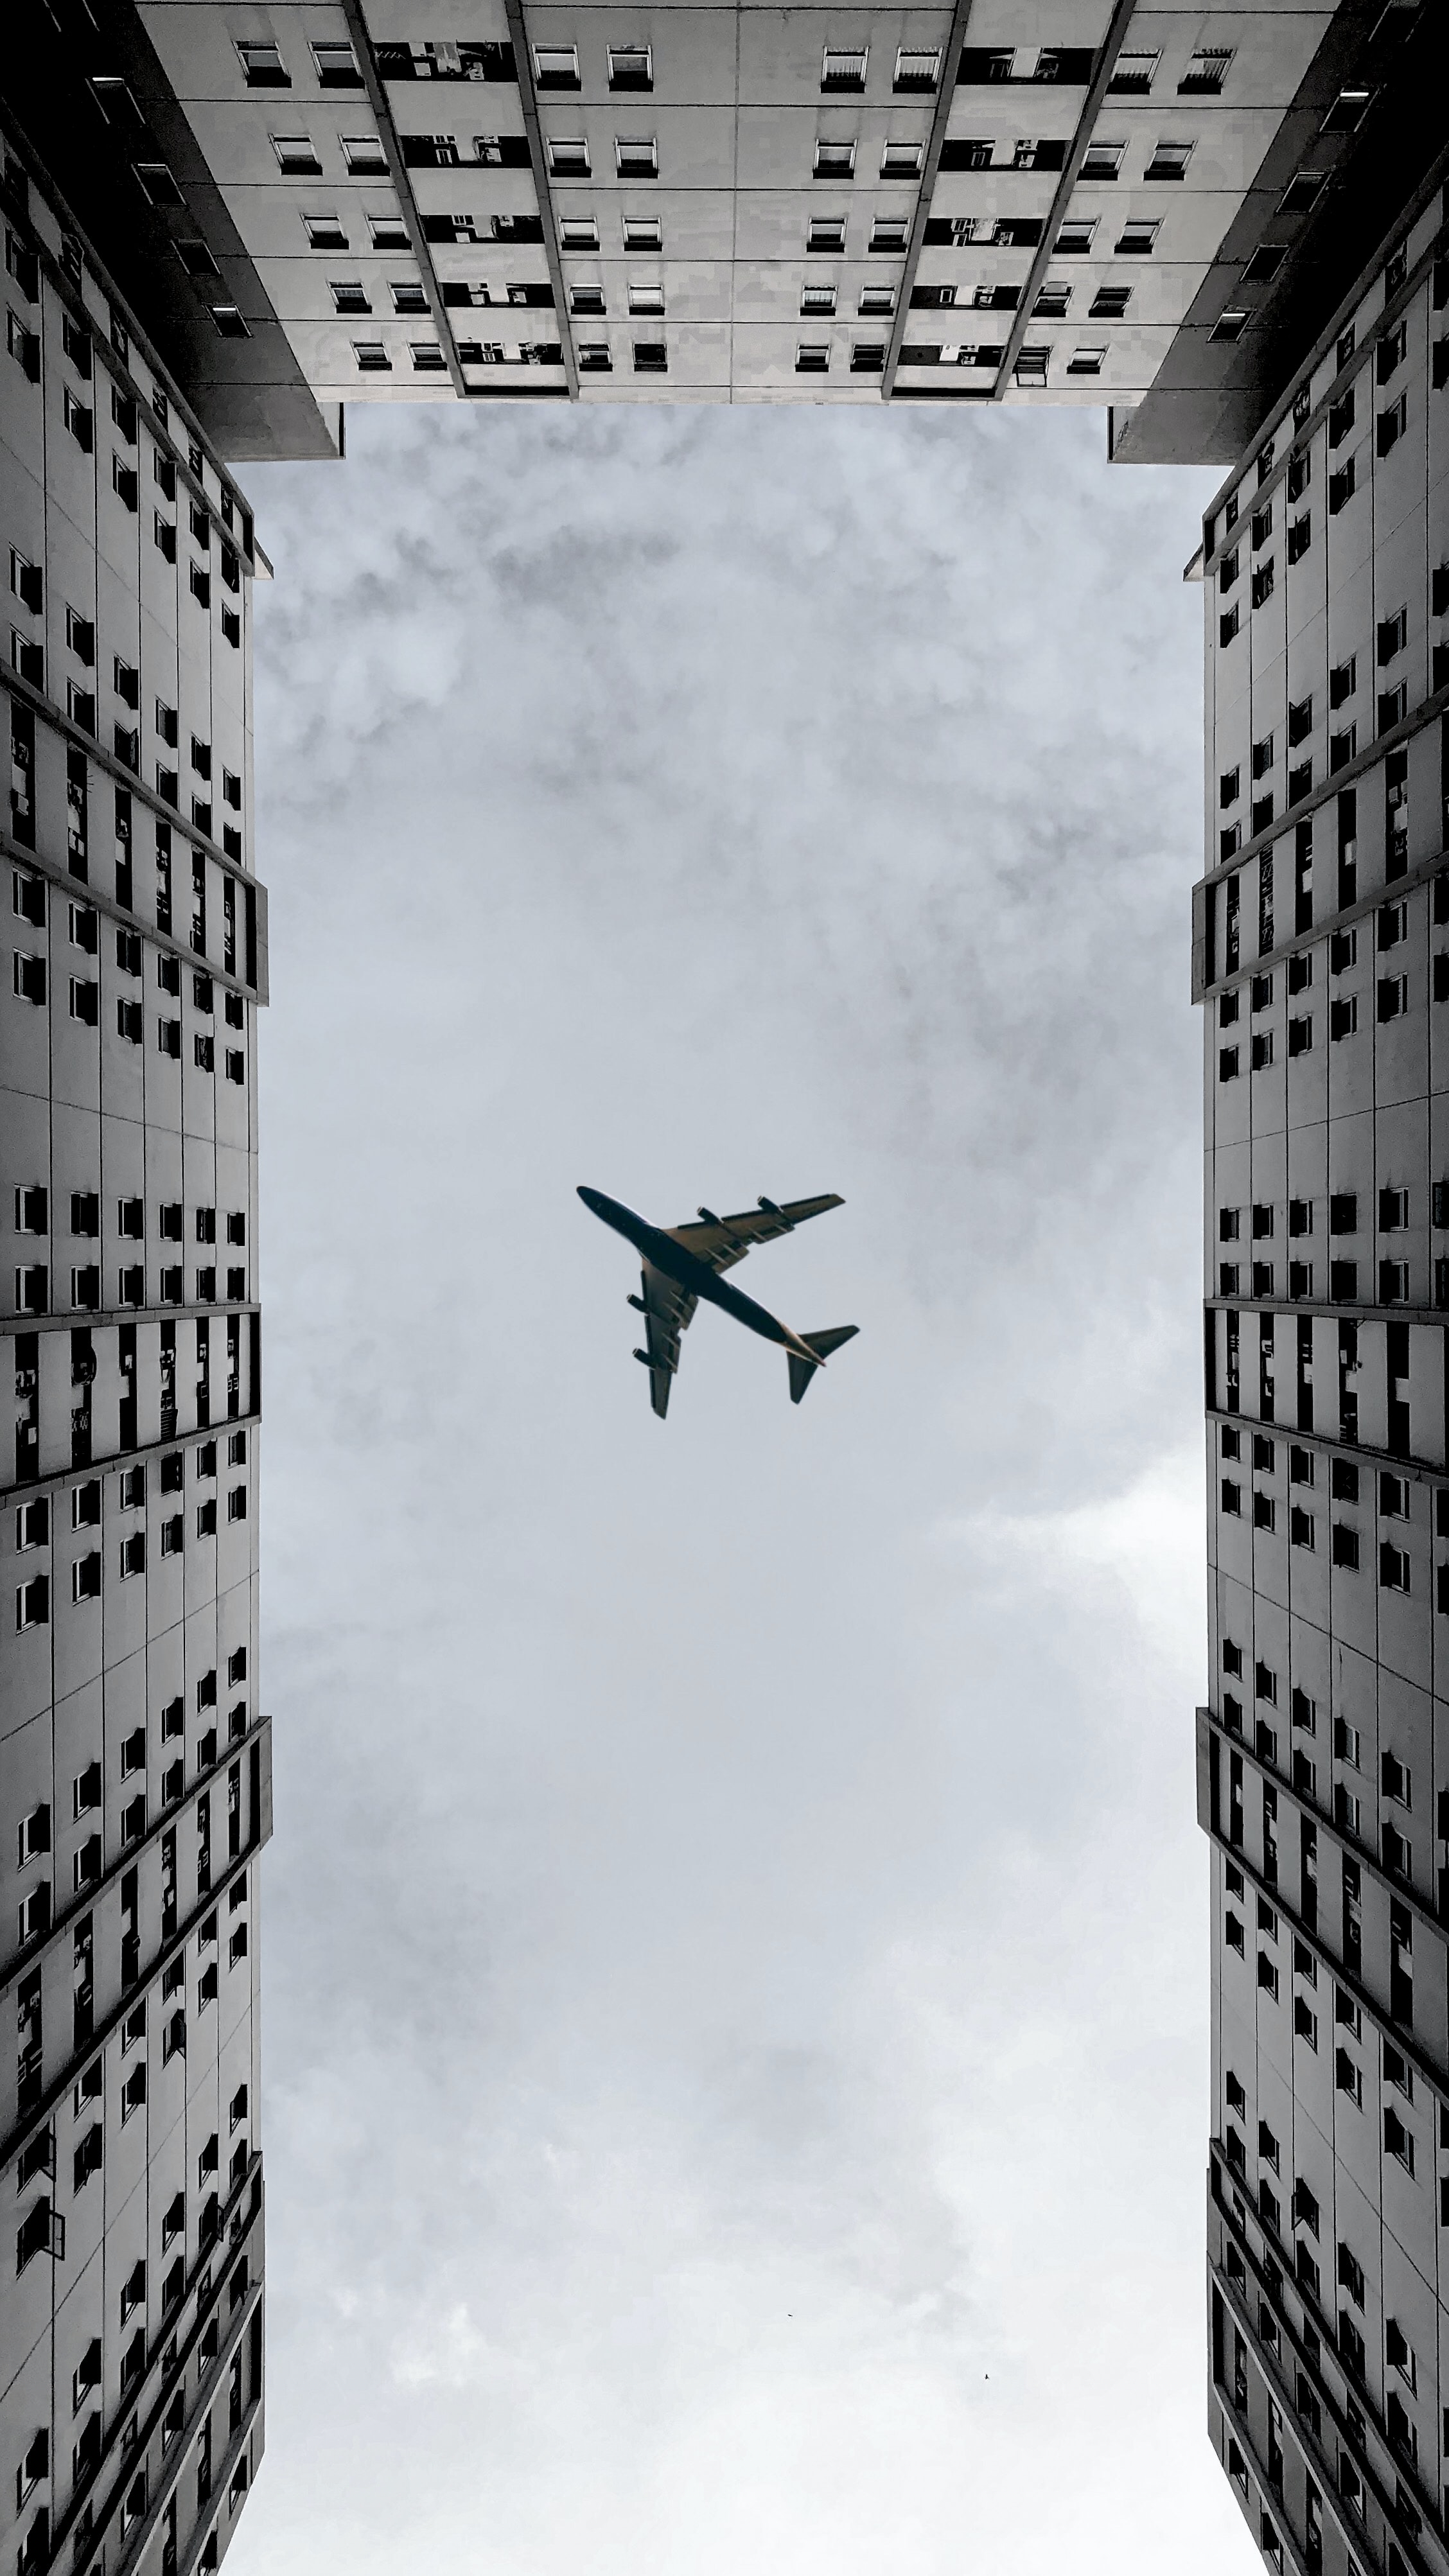 android grey, plane, clouds, building, miscellanea, miscellaneous, airplane, bottom view